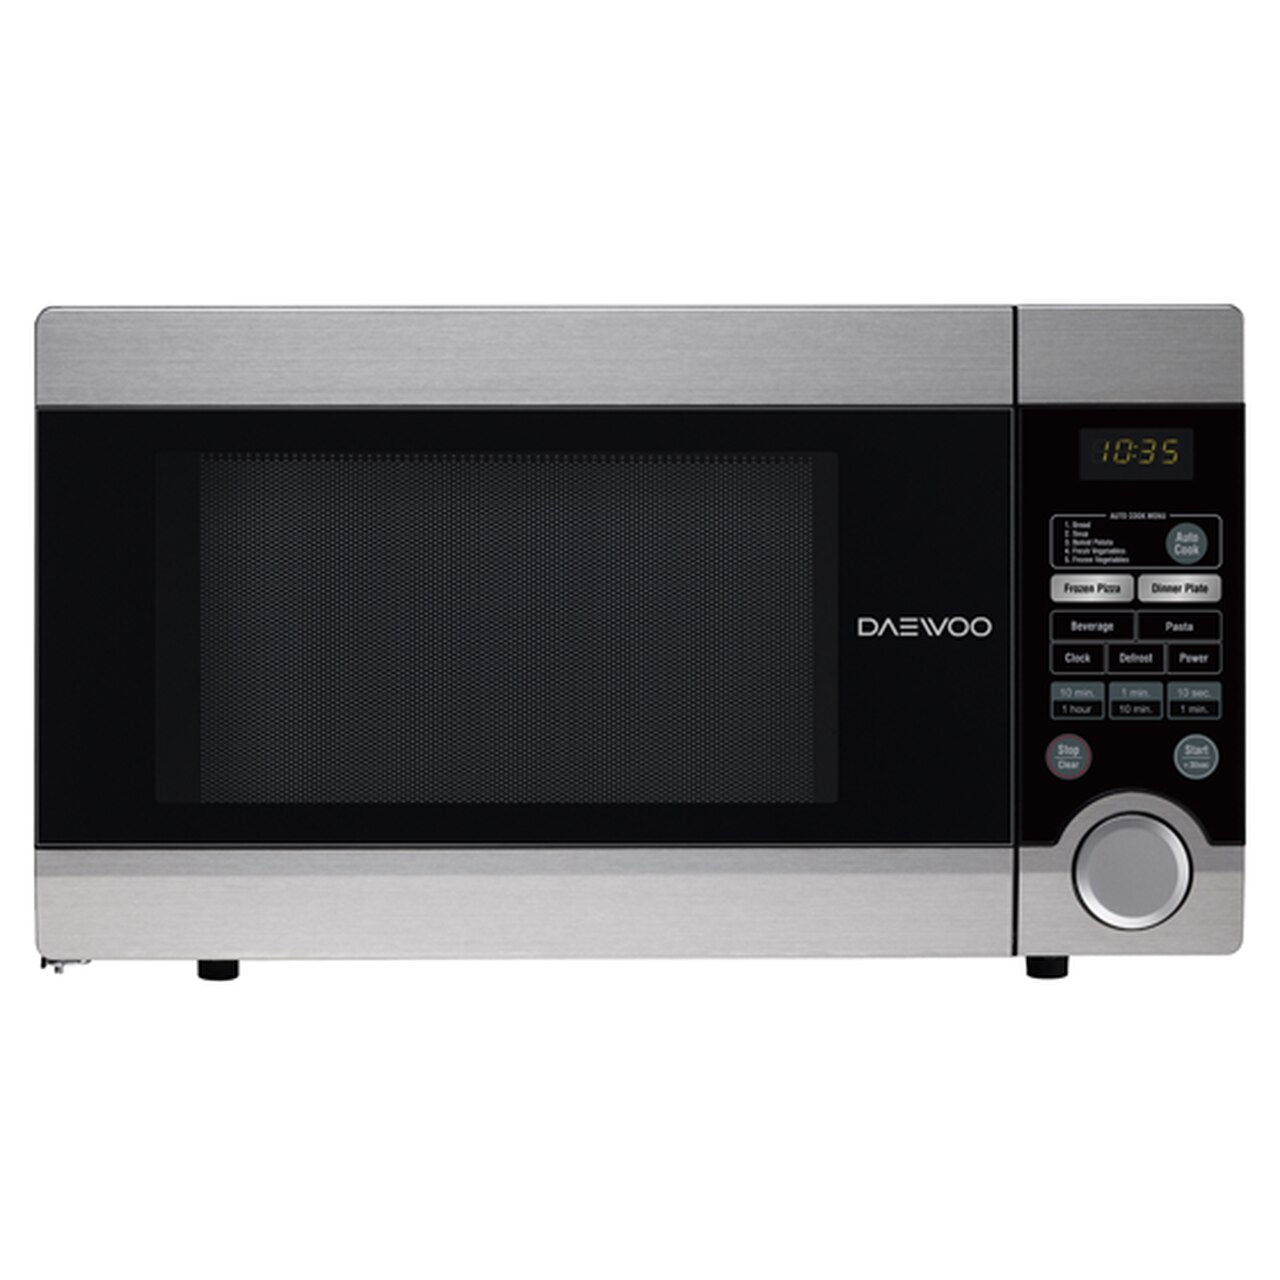 Daewoo microwave 31L 900W without grill stainless steel-KOR38S